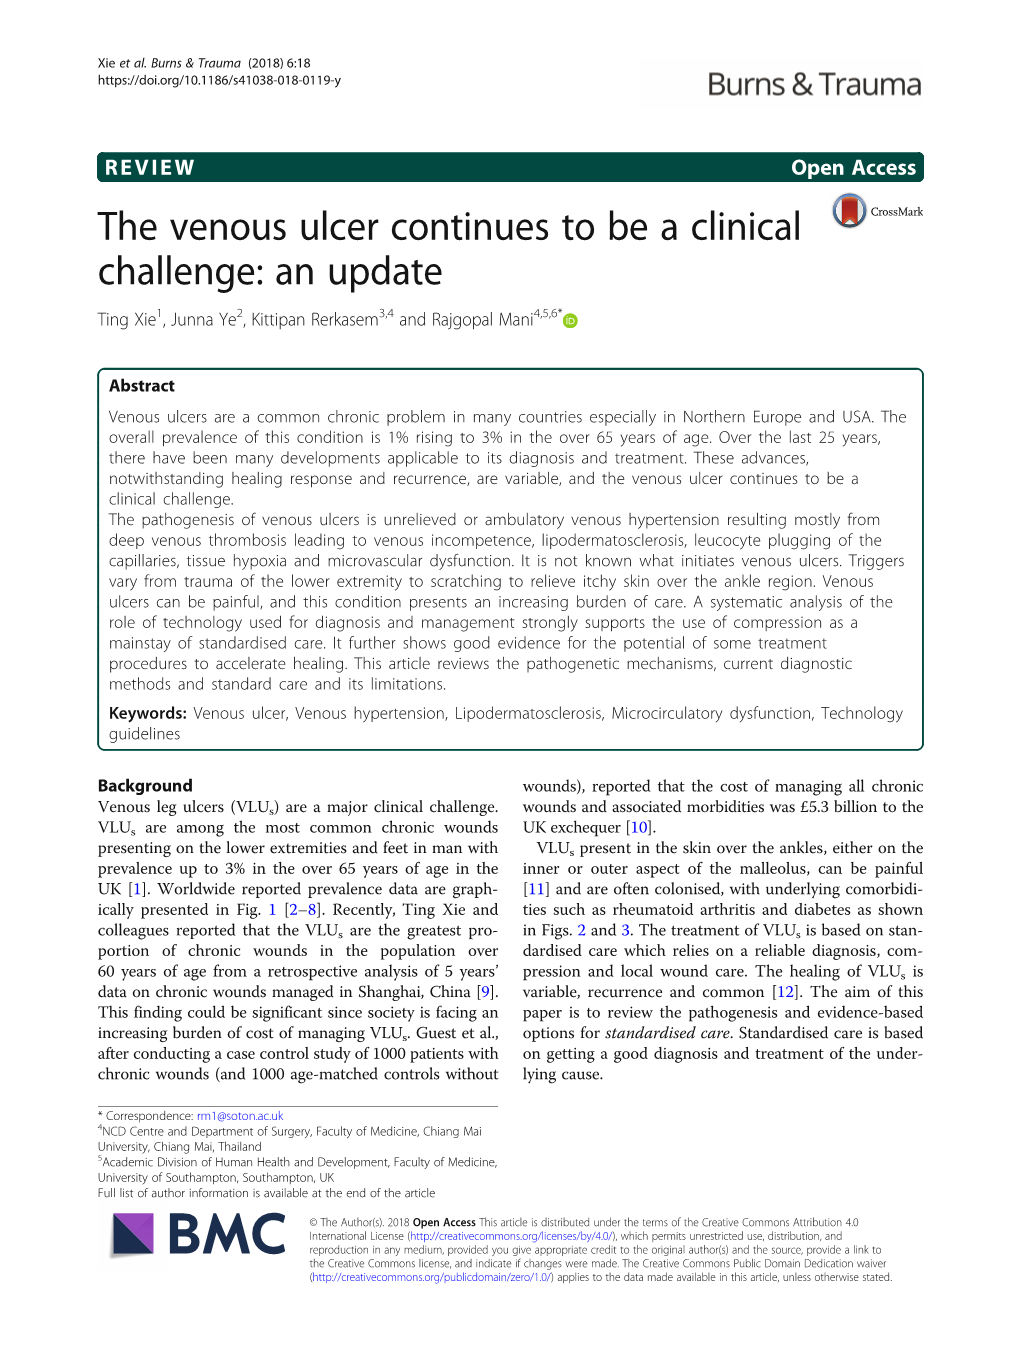 The Venous Ulcer Continues to Be a Clinical Challenge: an Update Ting Xie1, Junna Ye2, Kittipan Rerkasem3,4 and Rajgopal Mani4,5,6*